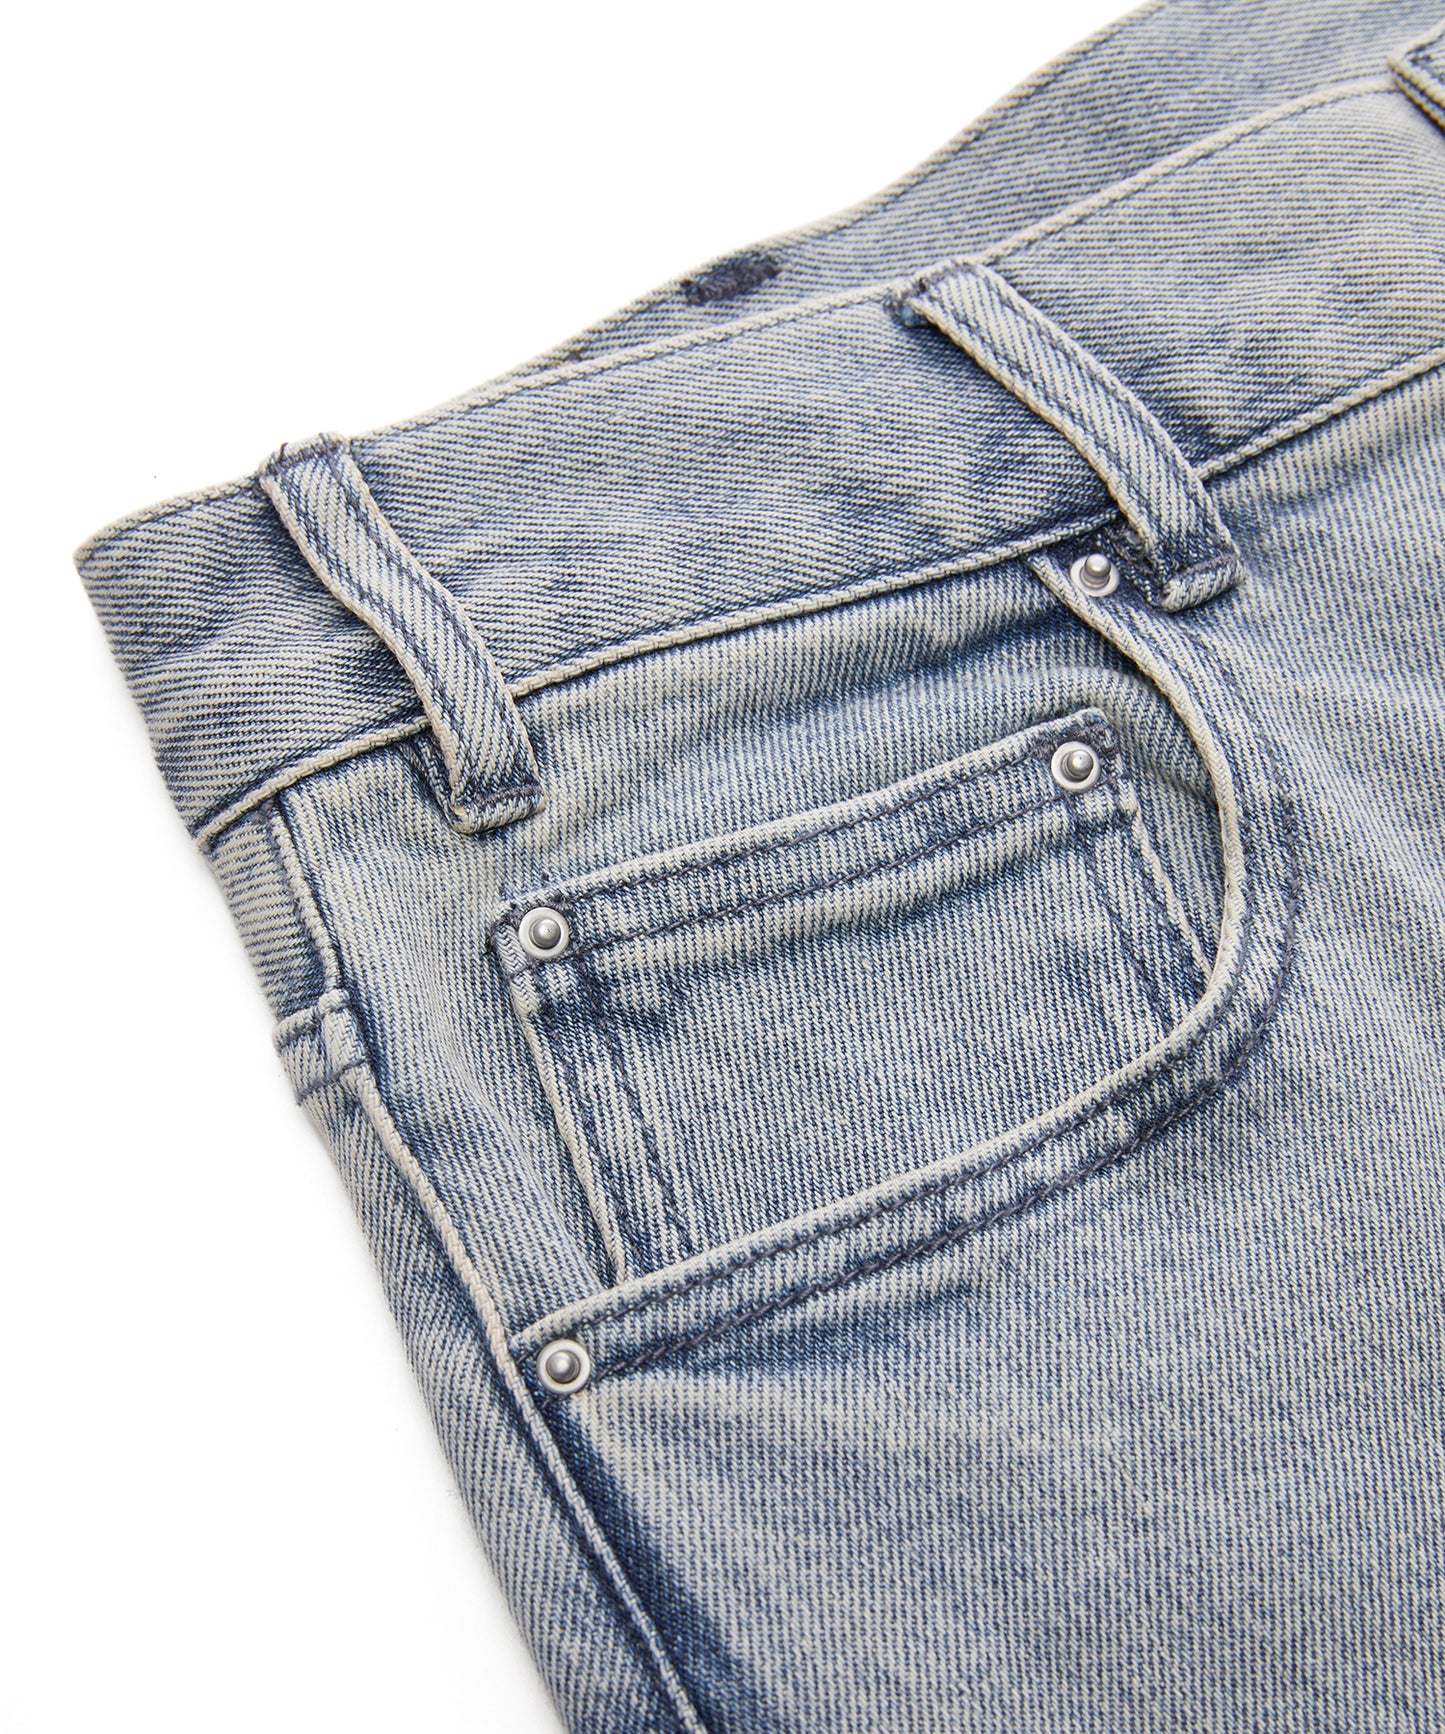 Retro Casual Bootcut jeans